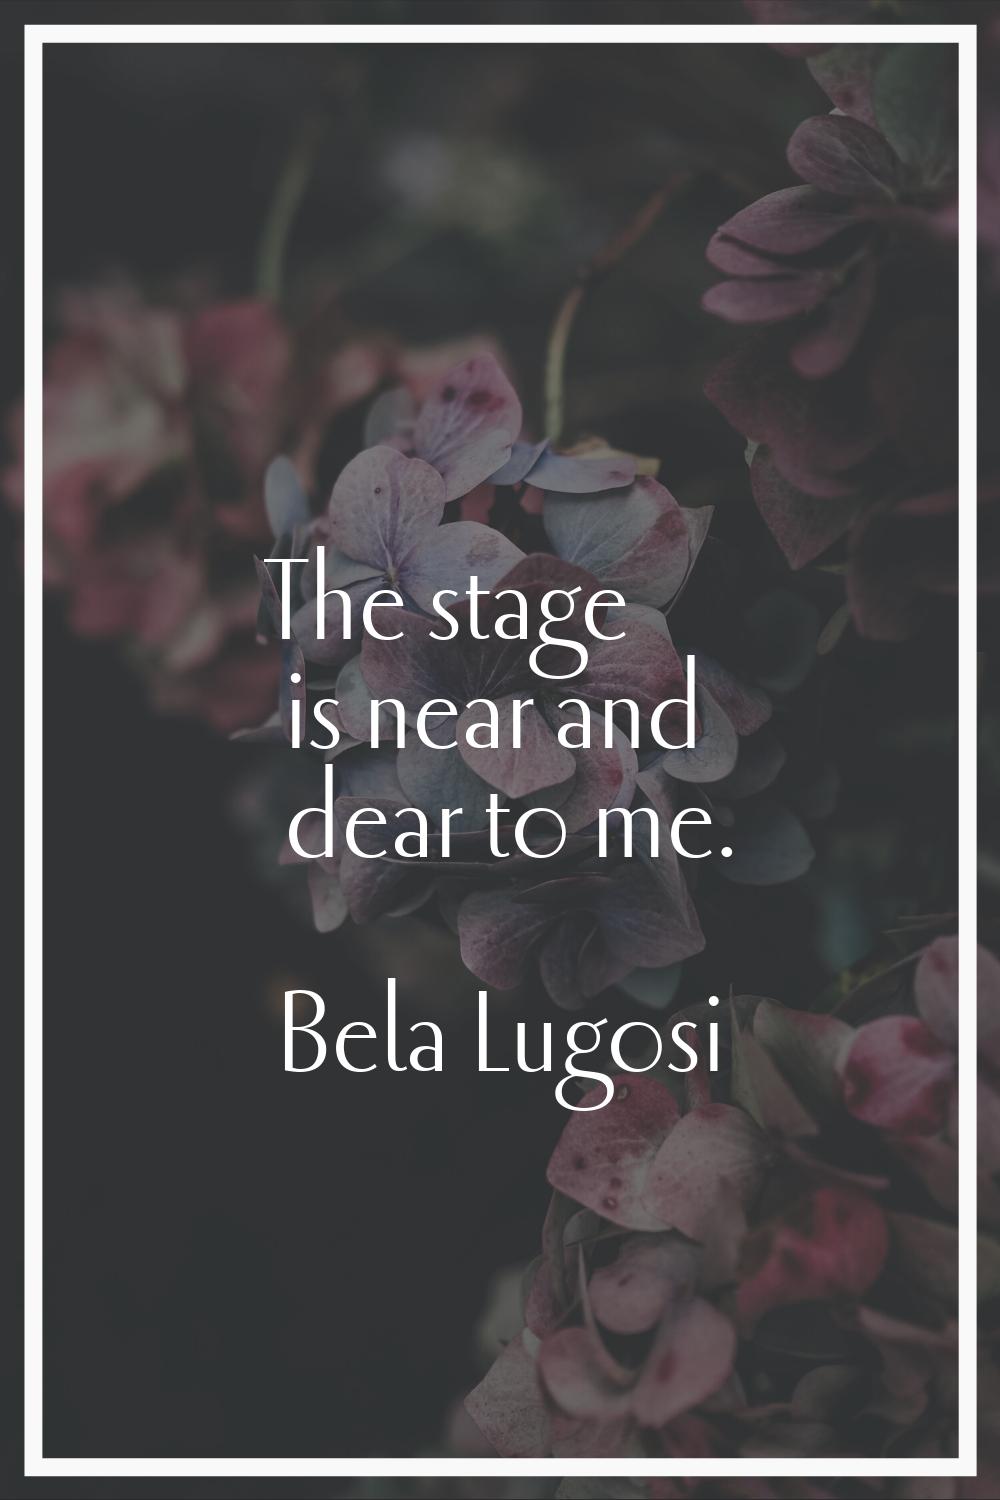 The stage is near and dear to me.